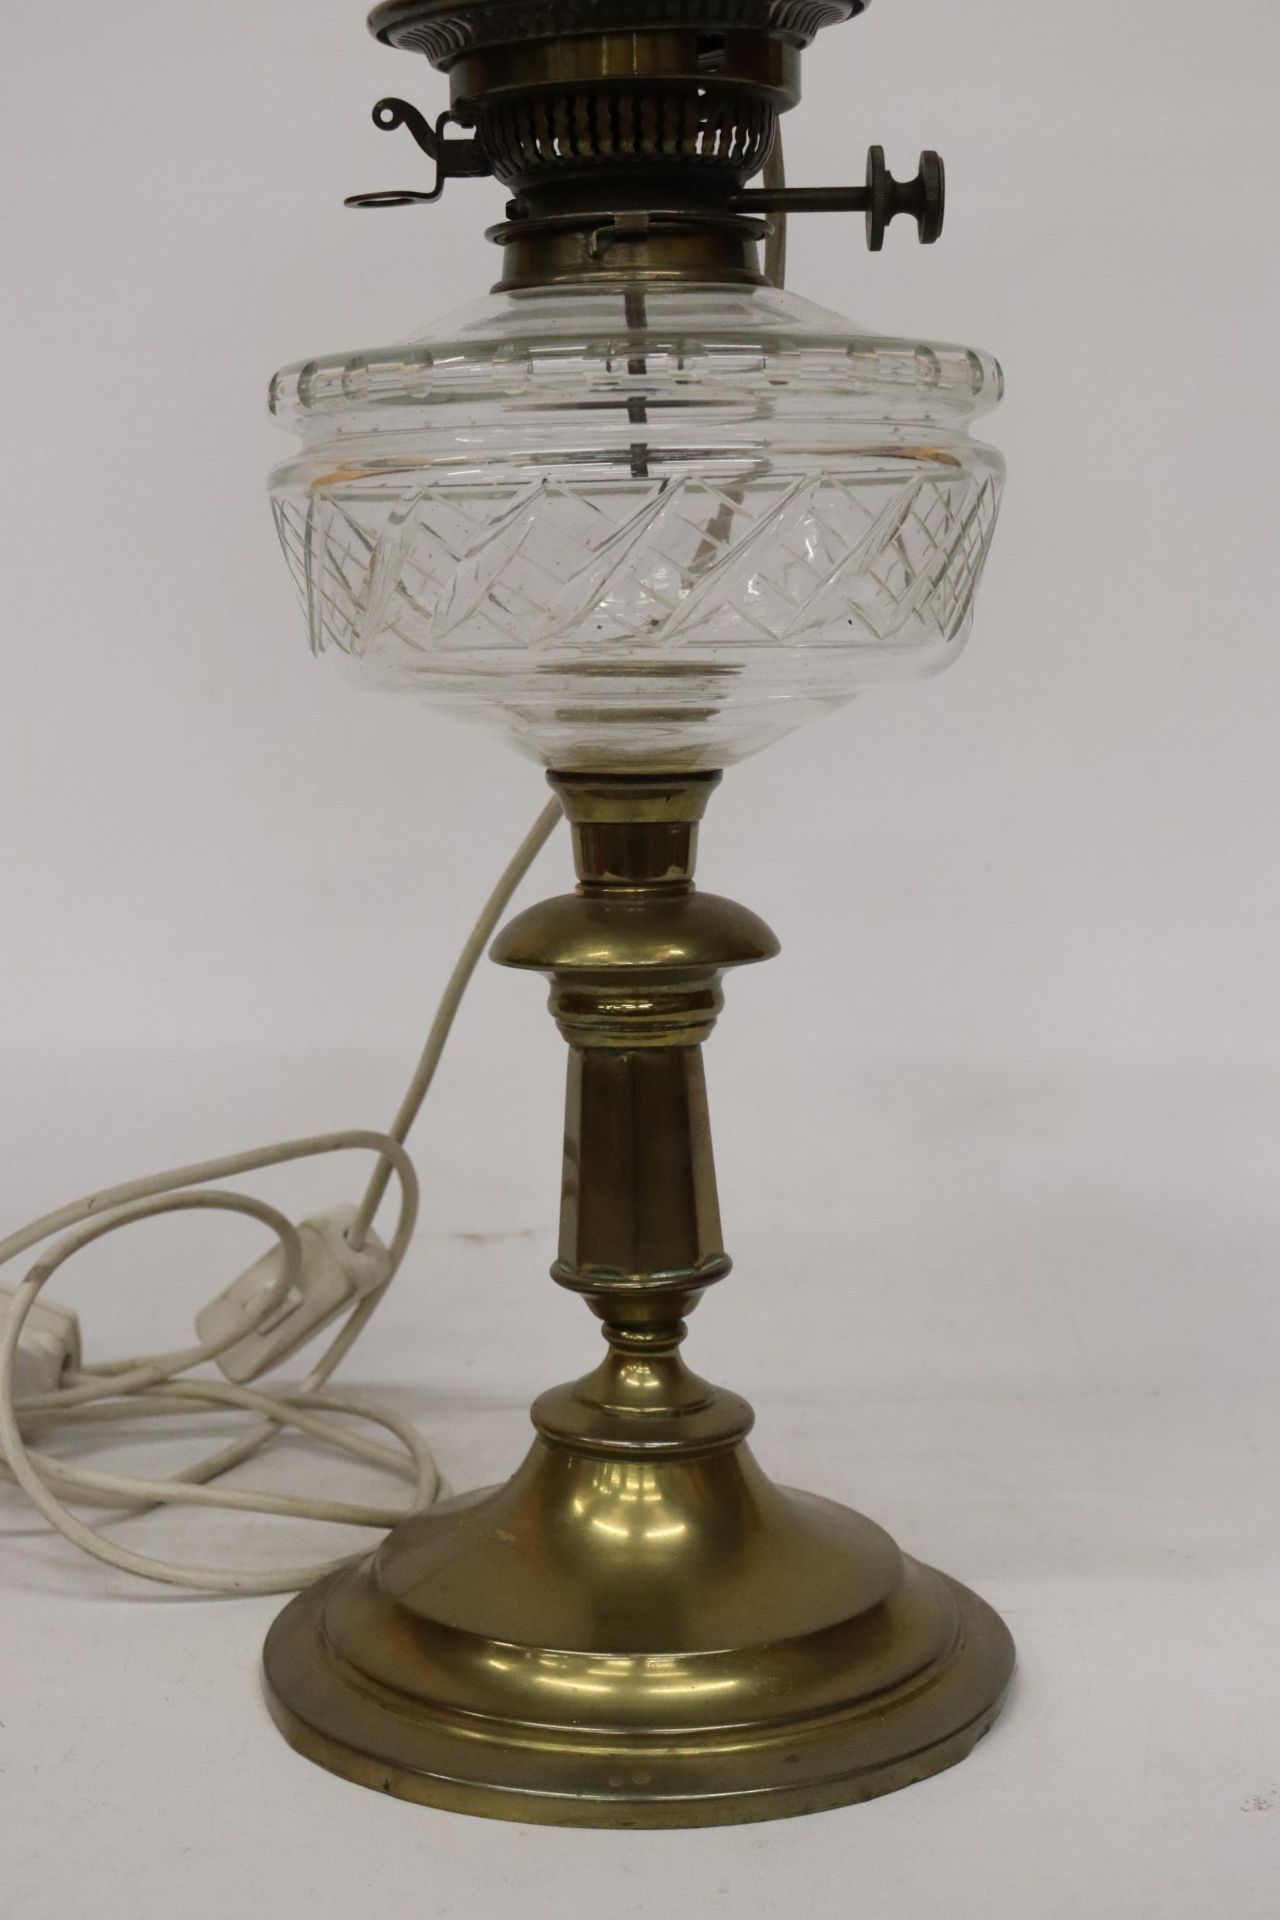 A 19TH CENTURY OIL LAMP CONVERTED TO ELECTRIC WITH A BRASS BASE, CLEAR CUT GLASS RESERVOIR, MILK - Image 8 of 8